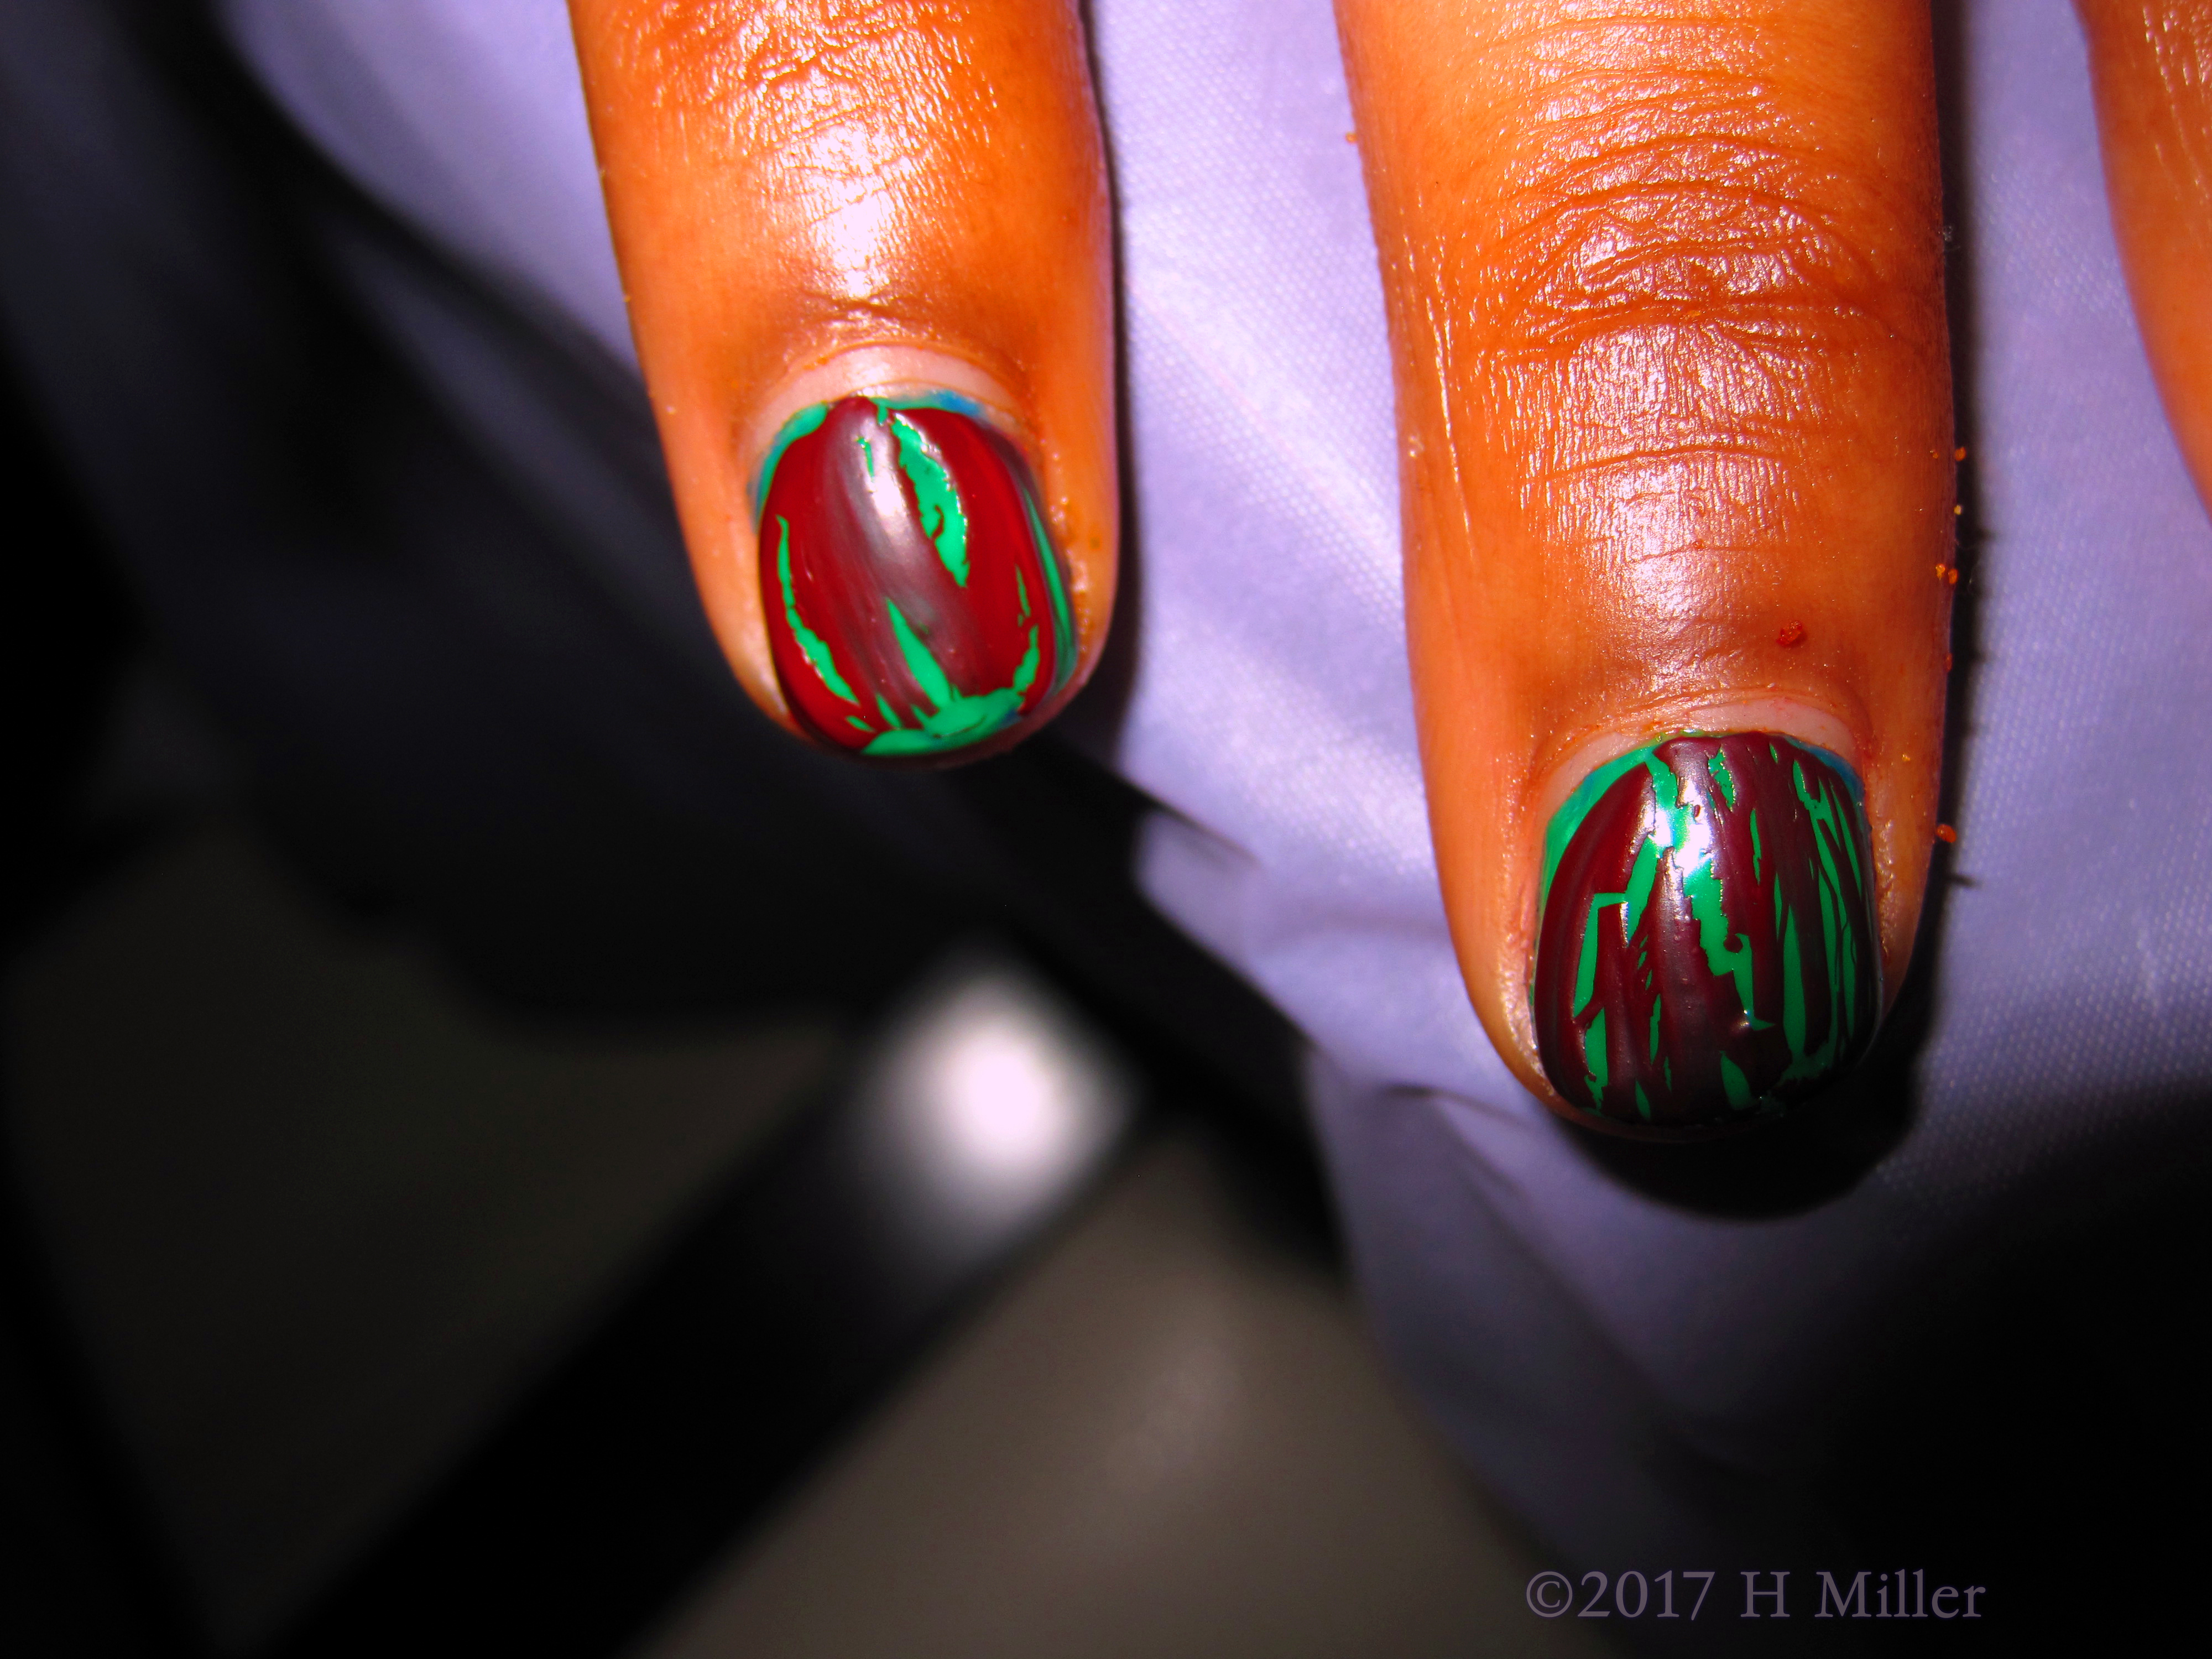 Green Base With Maroon Shatter Nail Polish, This Girls Manicure Looks Great! 